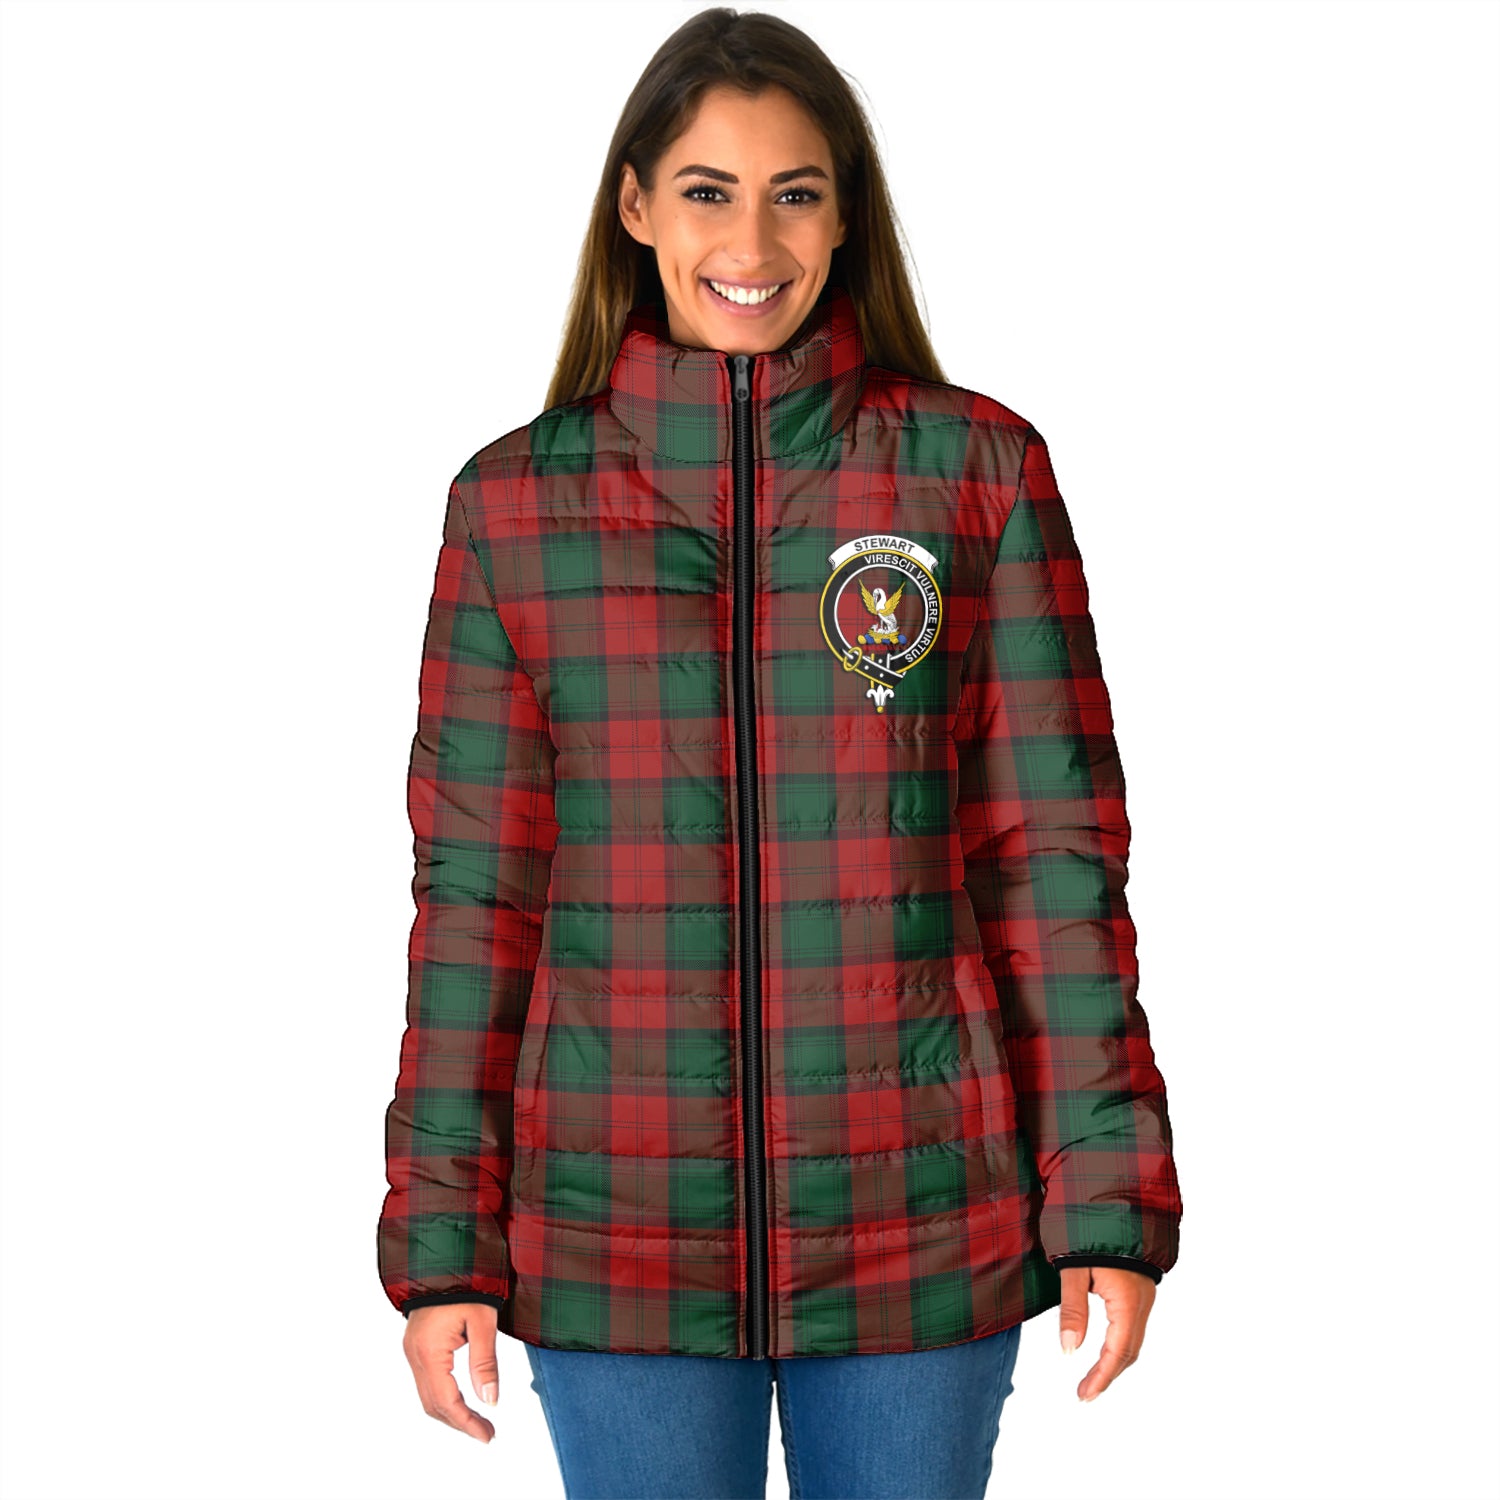 stewart-of-atholl-tartan-padded-jacket-with-family-crest